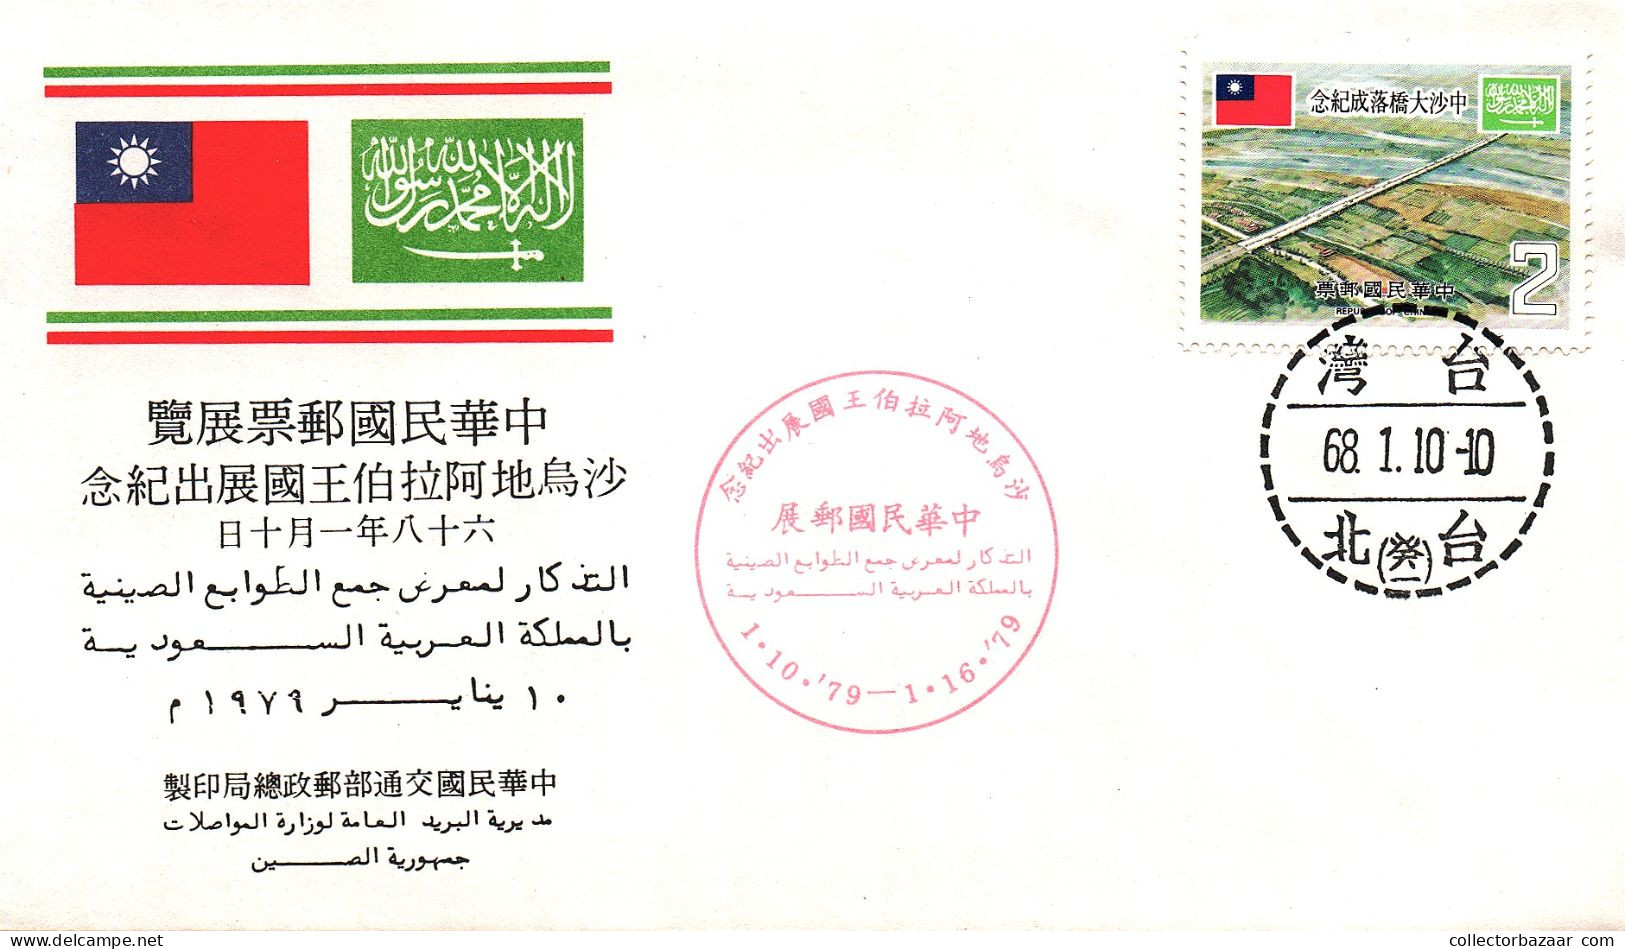 Taiwan Formosa Republic Of China FDC Cover Taiwan And Saudi Arabia Relation -  2$ Stamp - FDC